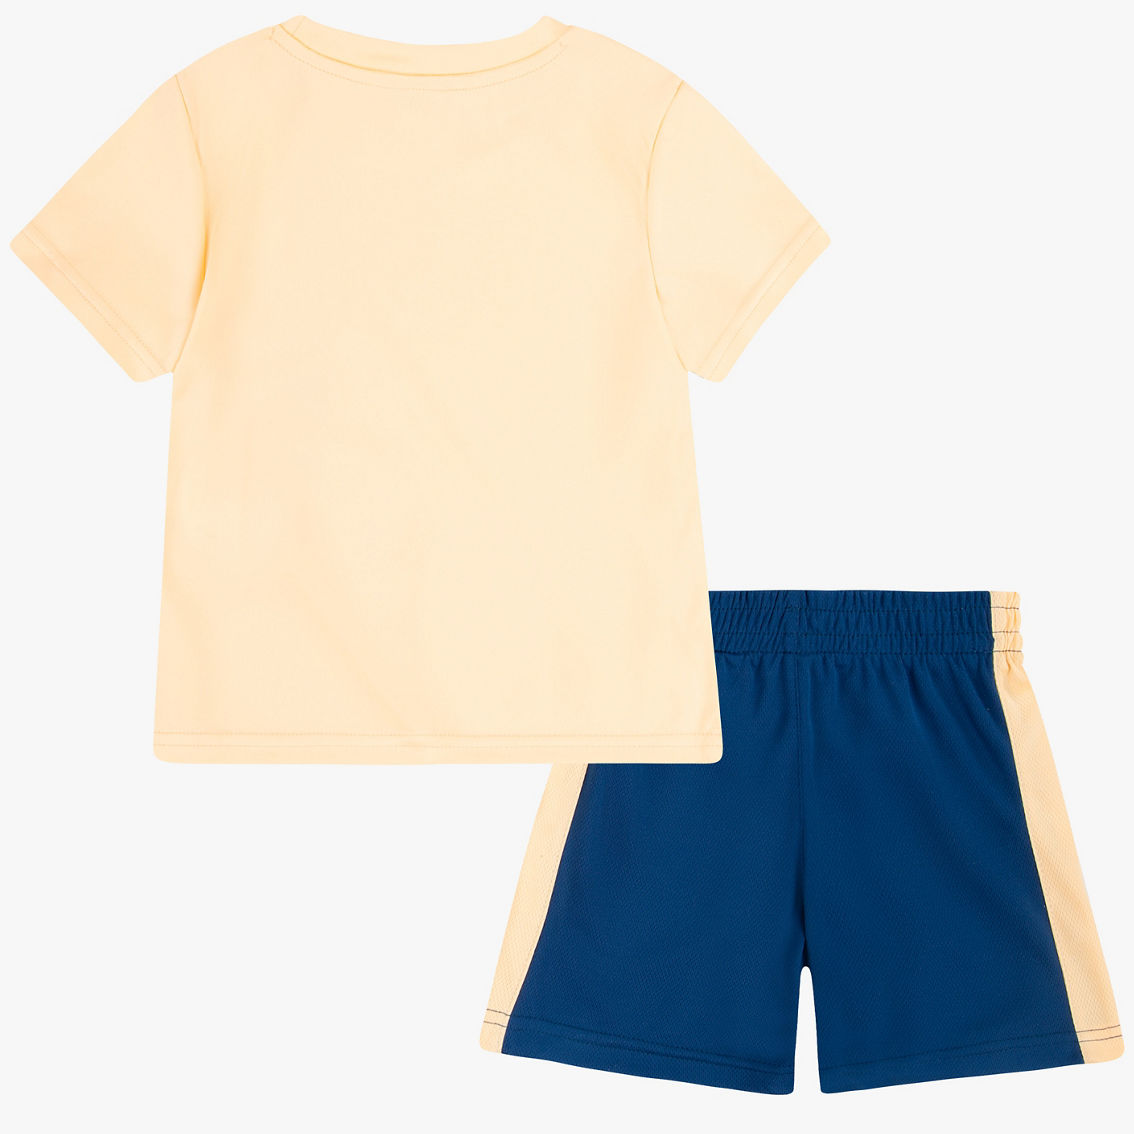 Hurley Toddler Boys Vertical Fastlane Tee and Shorts 2 pc. Set - Image 2 of 4